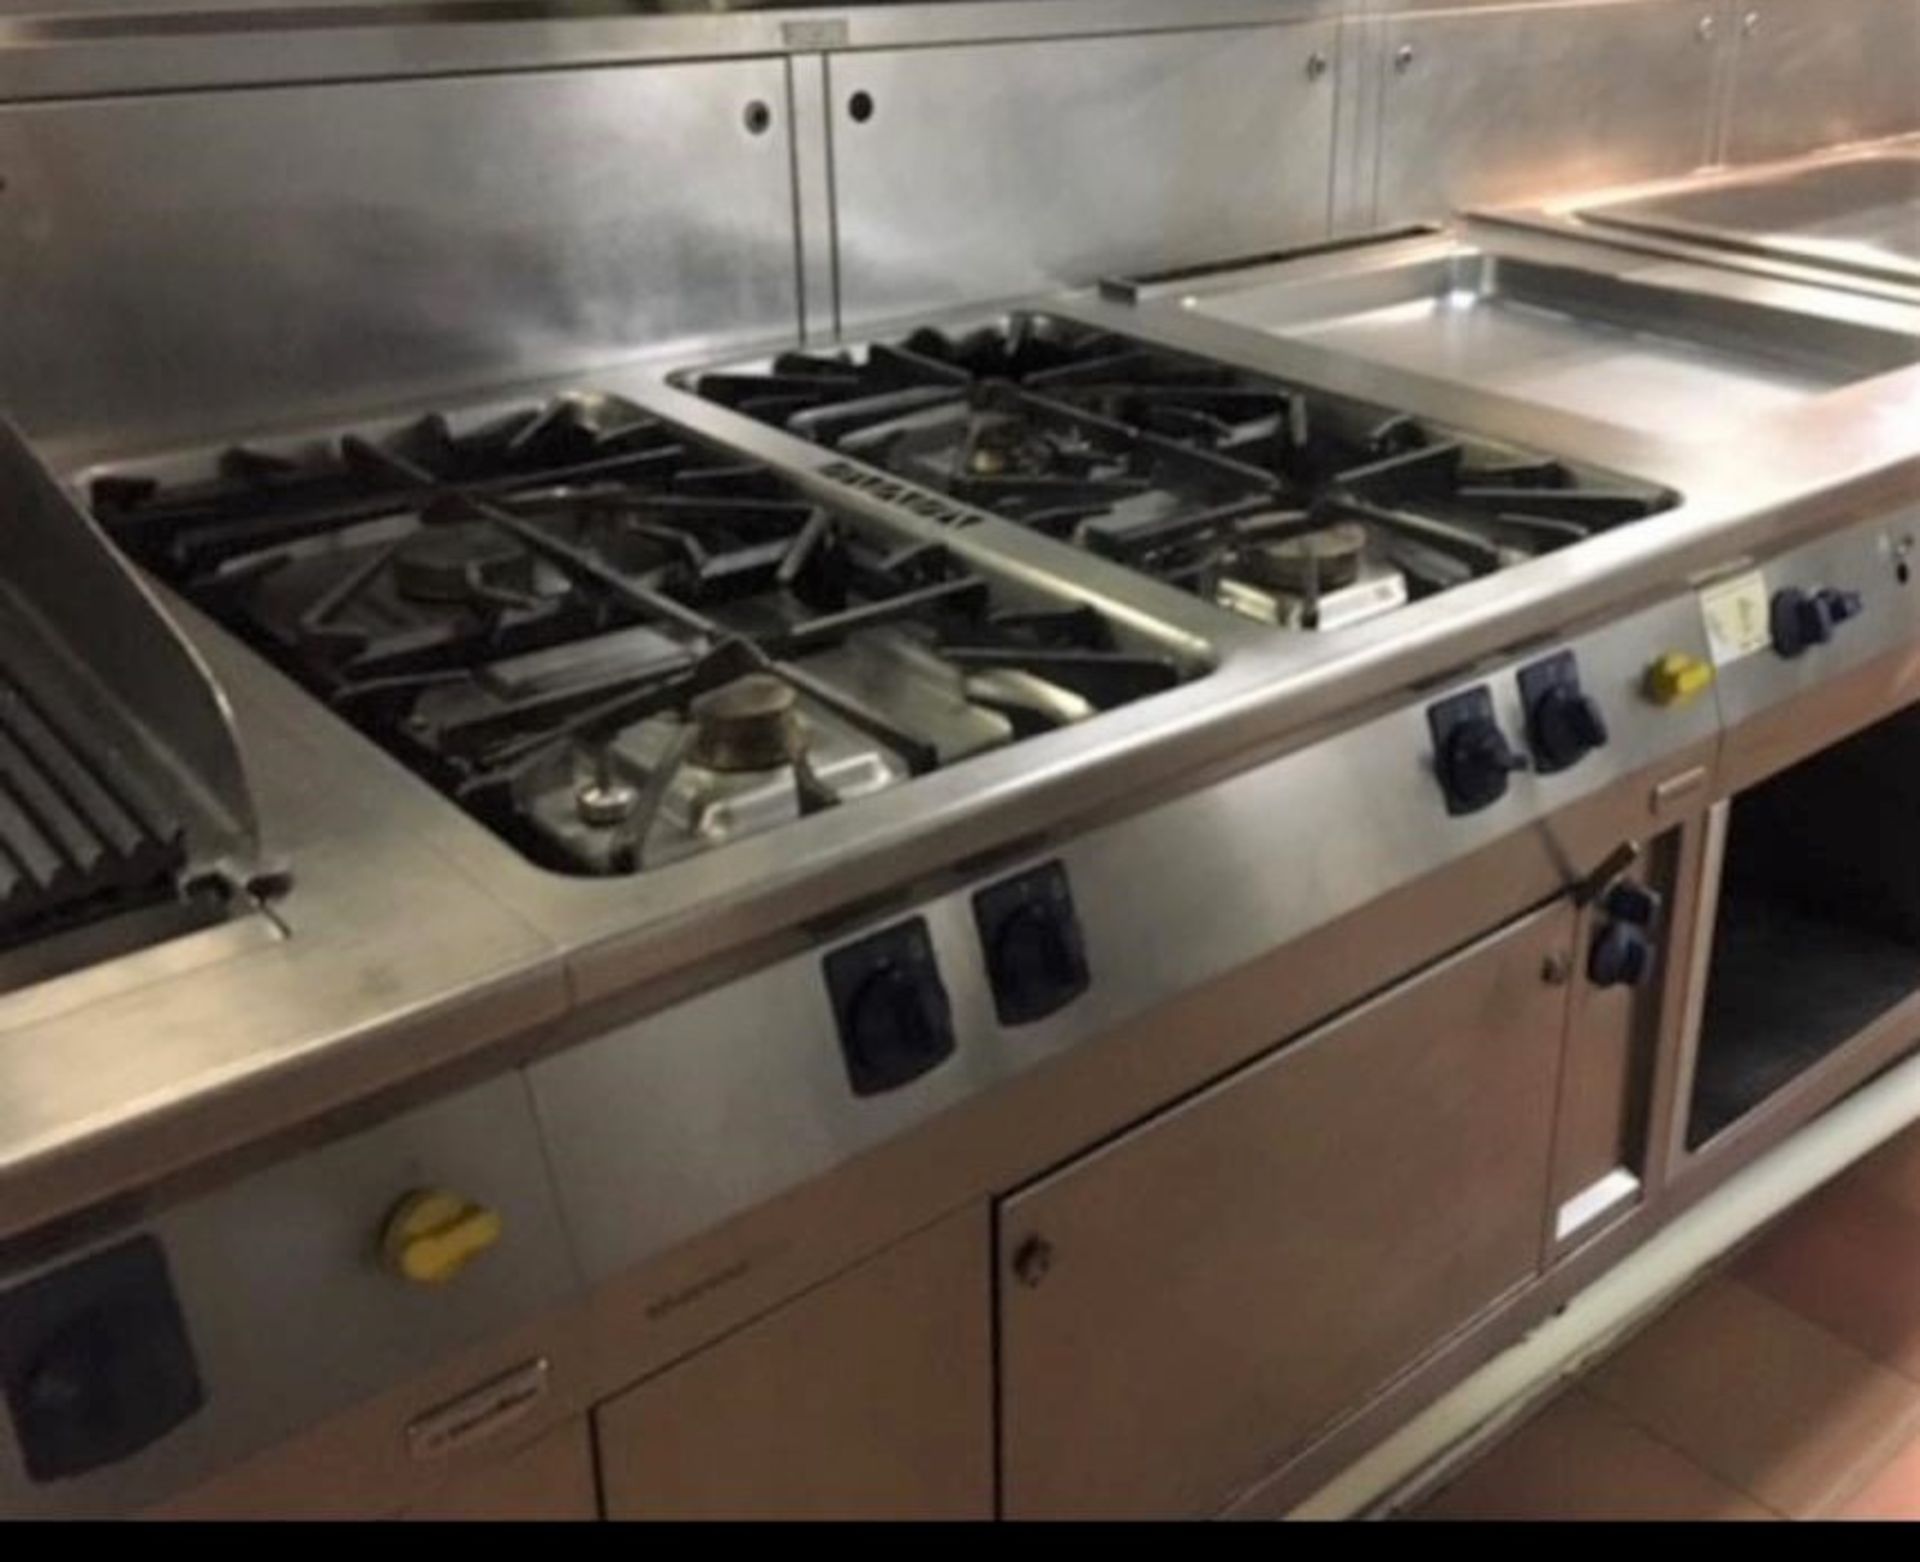 1 x Electrolux Thermoline Four Burner Range Cooker - Gas Powered - Recently Removed From a Luxury